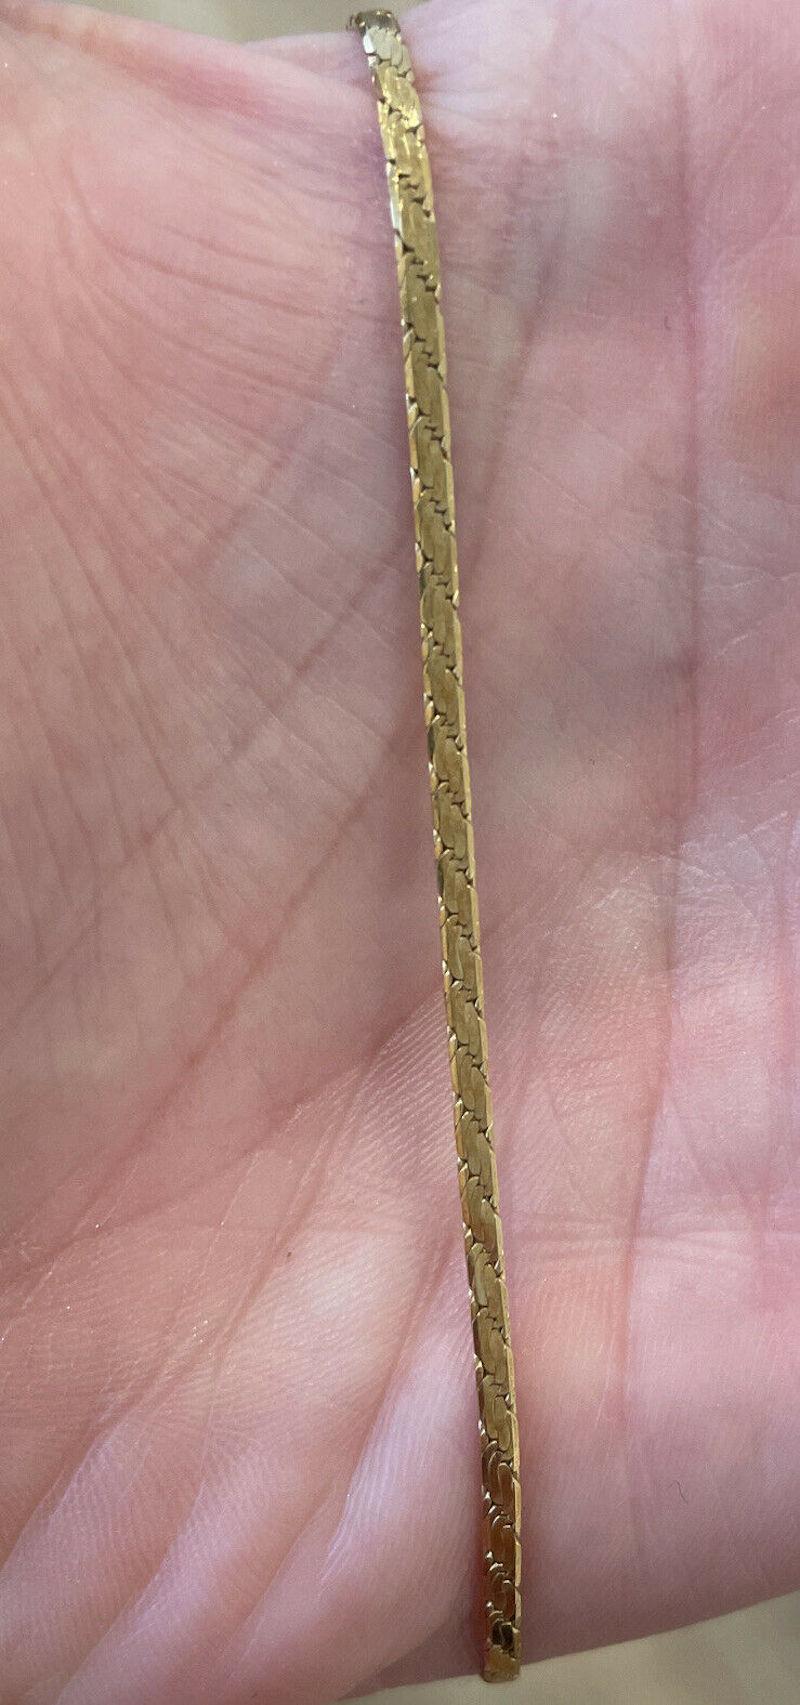 18K Yellow Gold Flat Chain Necklace 1.8mm 15' Inches


For sale is a 18k yellow gold flat chain necklace.
 Perfect worn day or night.


Metal: 18k yellow Gold
     
Hallmark: 750 

Length: 15' inches

Width: 1.8 mm

Weight: 6.1 grams
